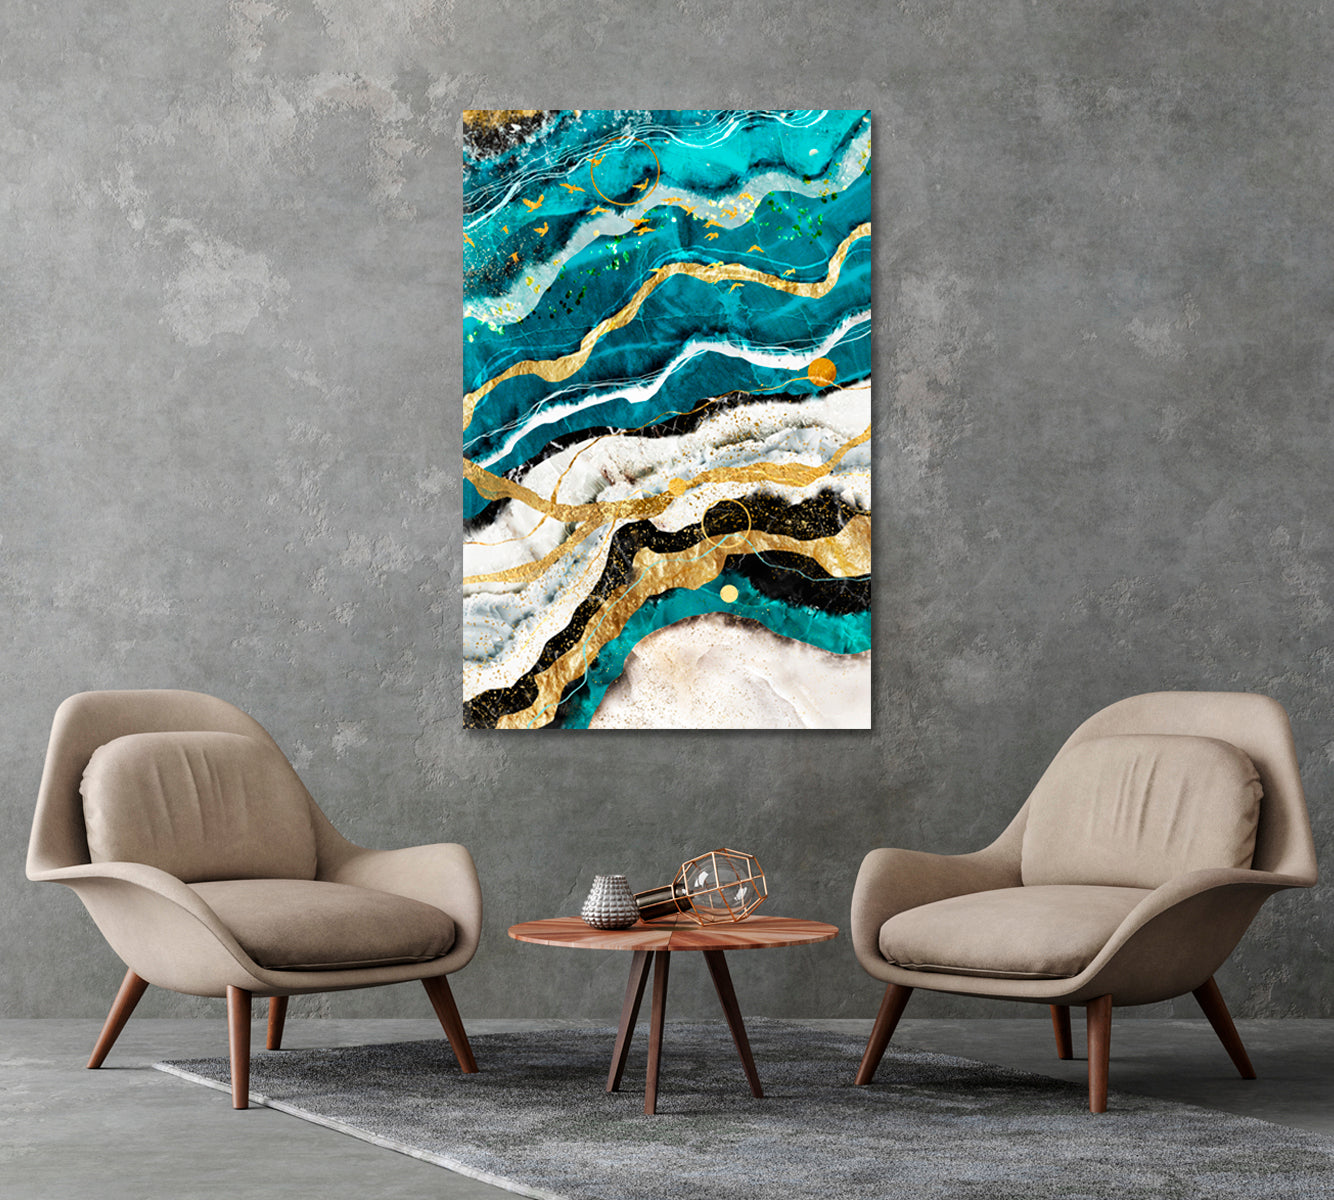 Abstract Blue Ocean Marble Pattern with Veins Canvas Print-Canvas Print-CetArt-1 panel-16x24 inches-CetArt